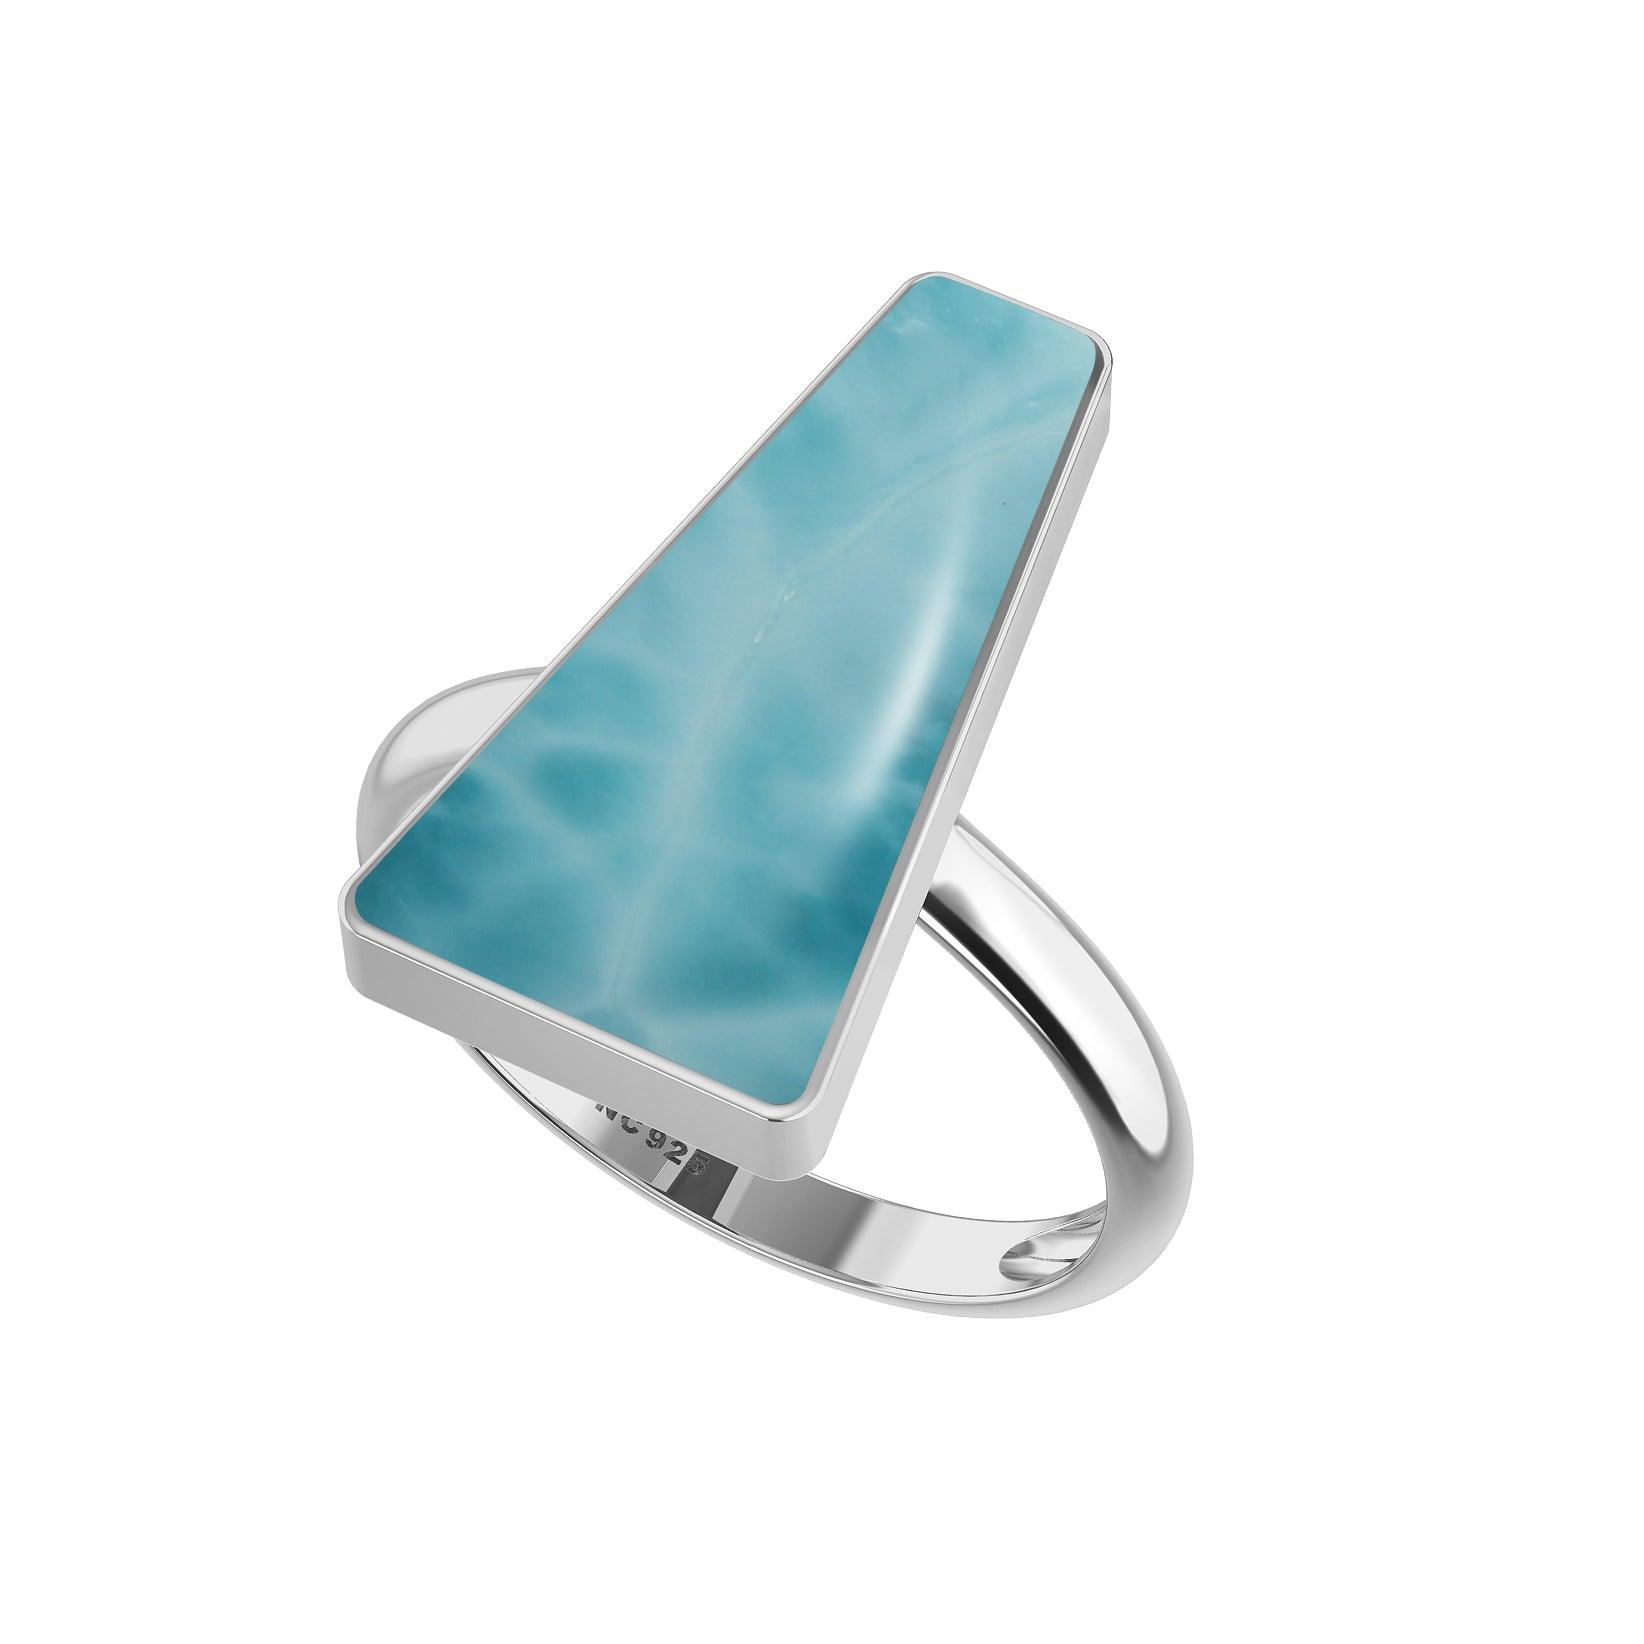 Natural Larimar Ring 925 Sterling Silver Bezel Set Handmade Jewelry Pack of 6 (Box 8)